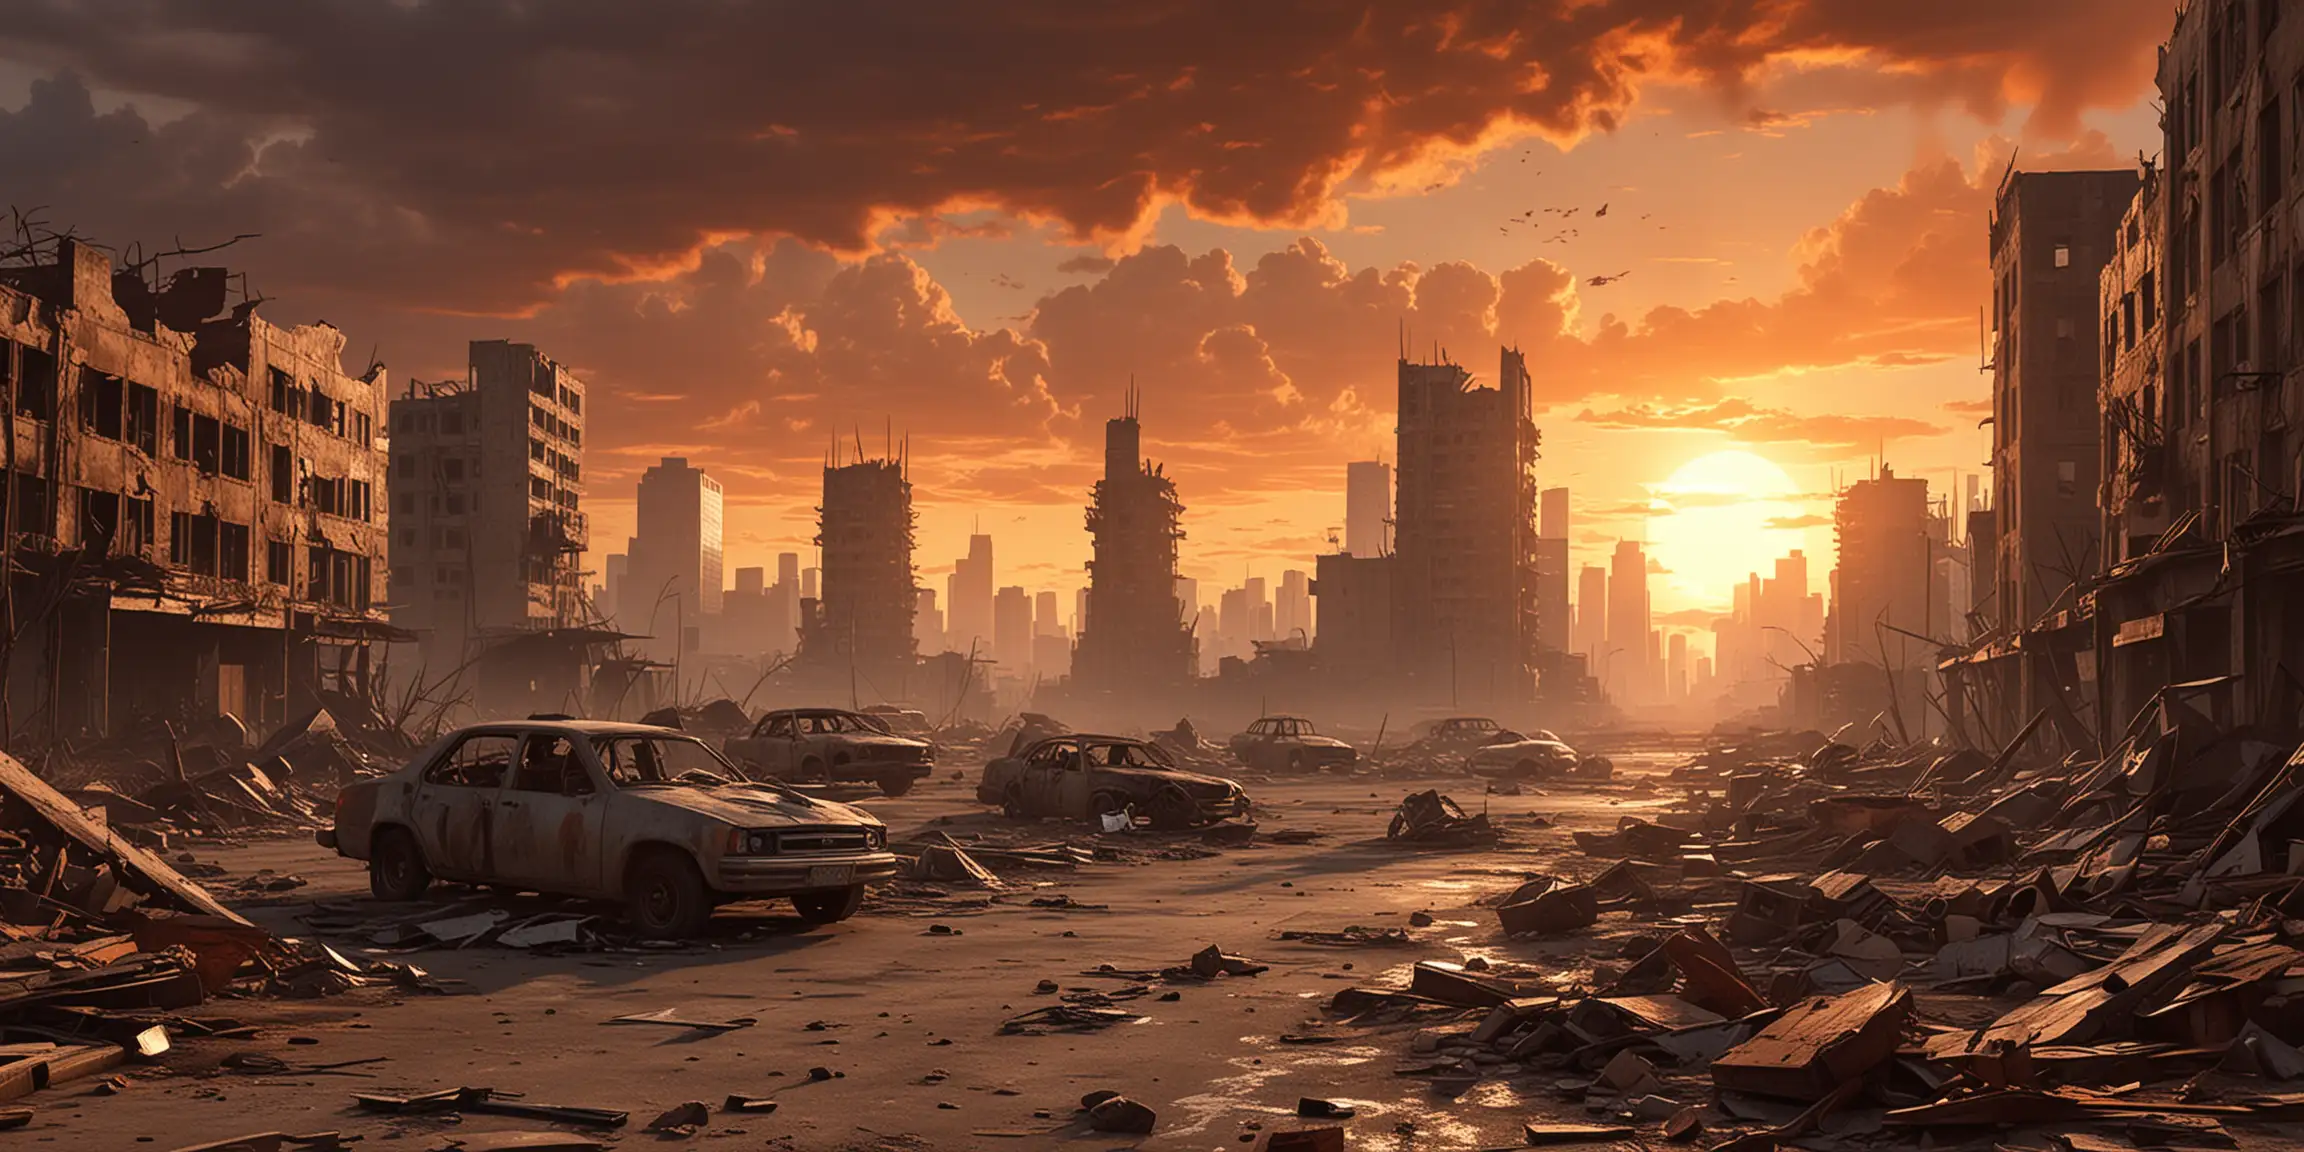 Desolate PostApocalyptic Cityscape at Sunset